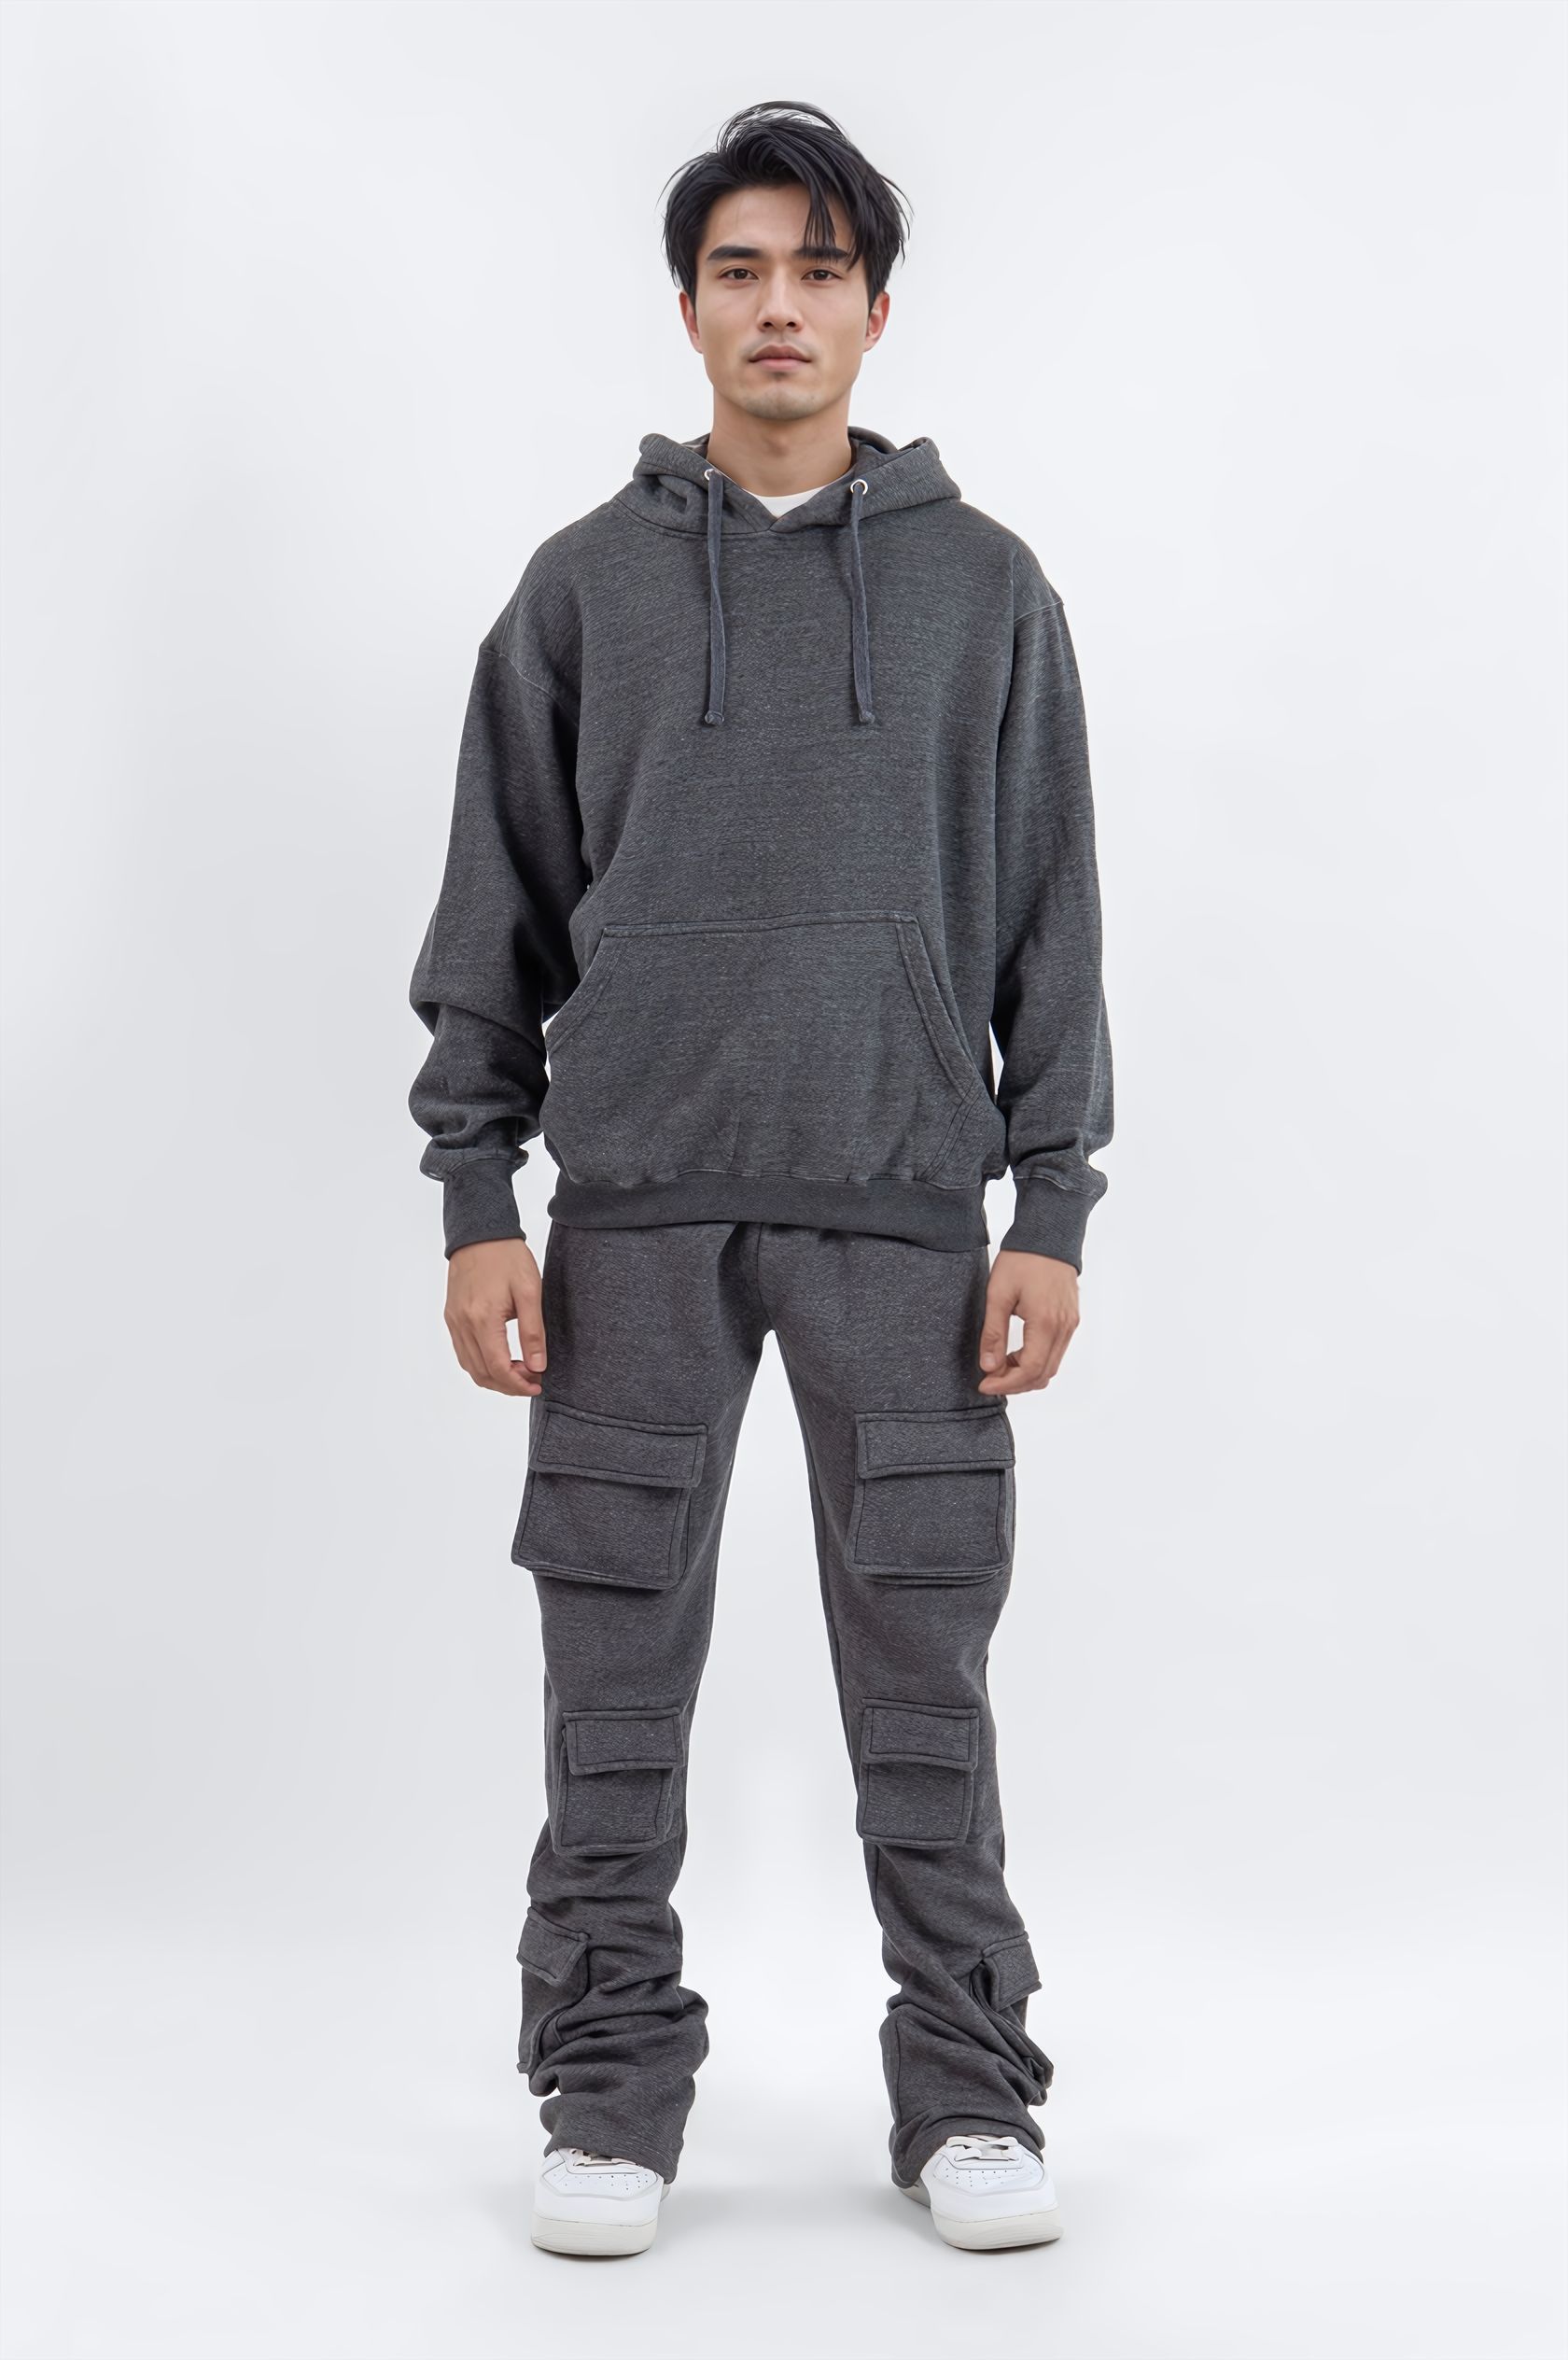 Charcoal 6 Pocket Flared Sweatsuit